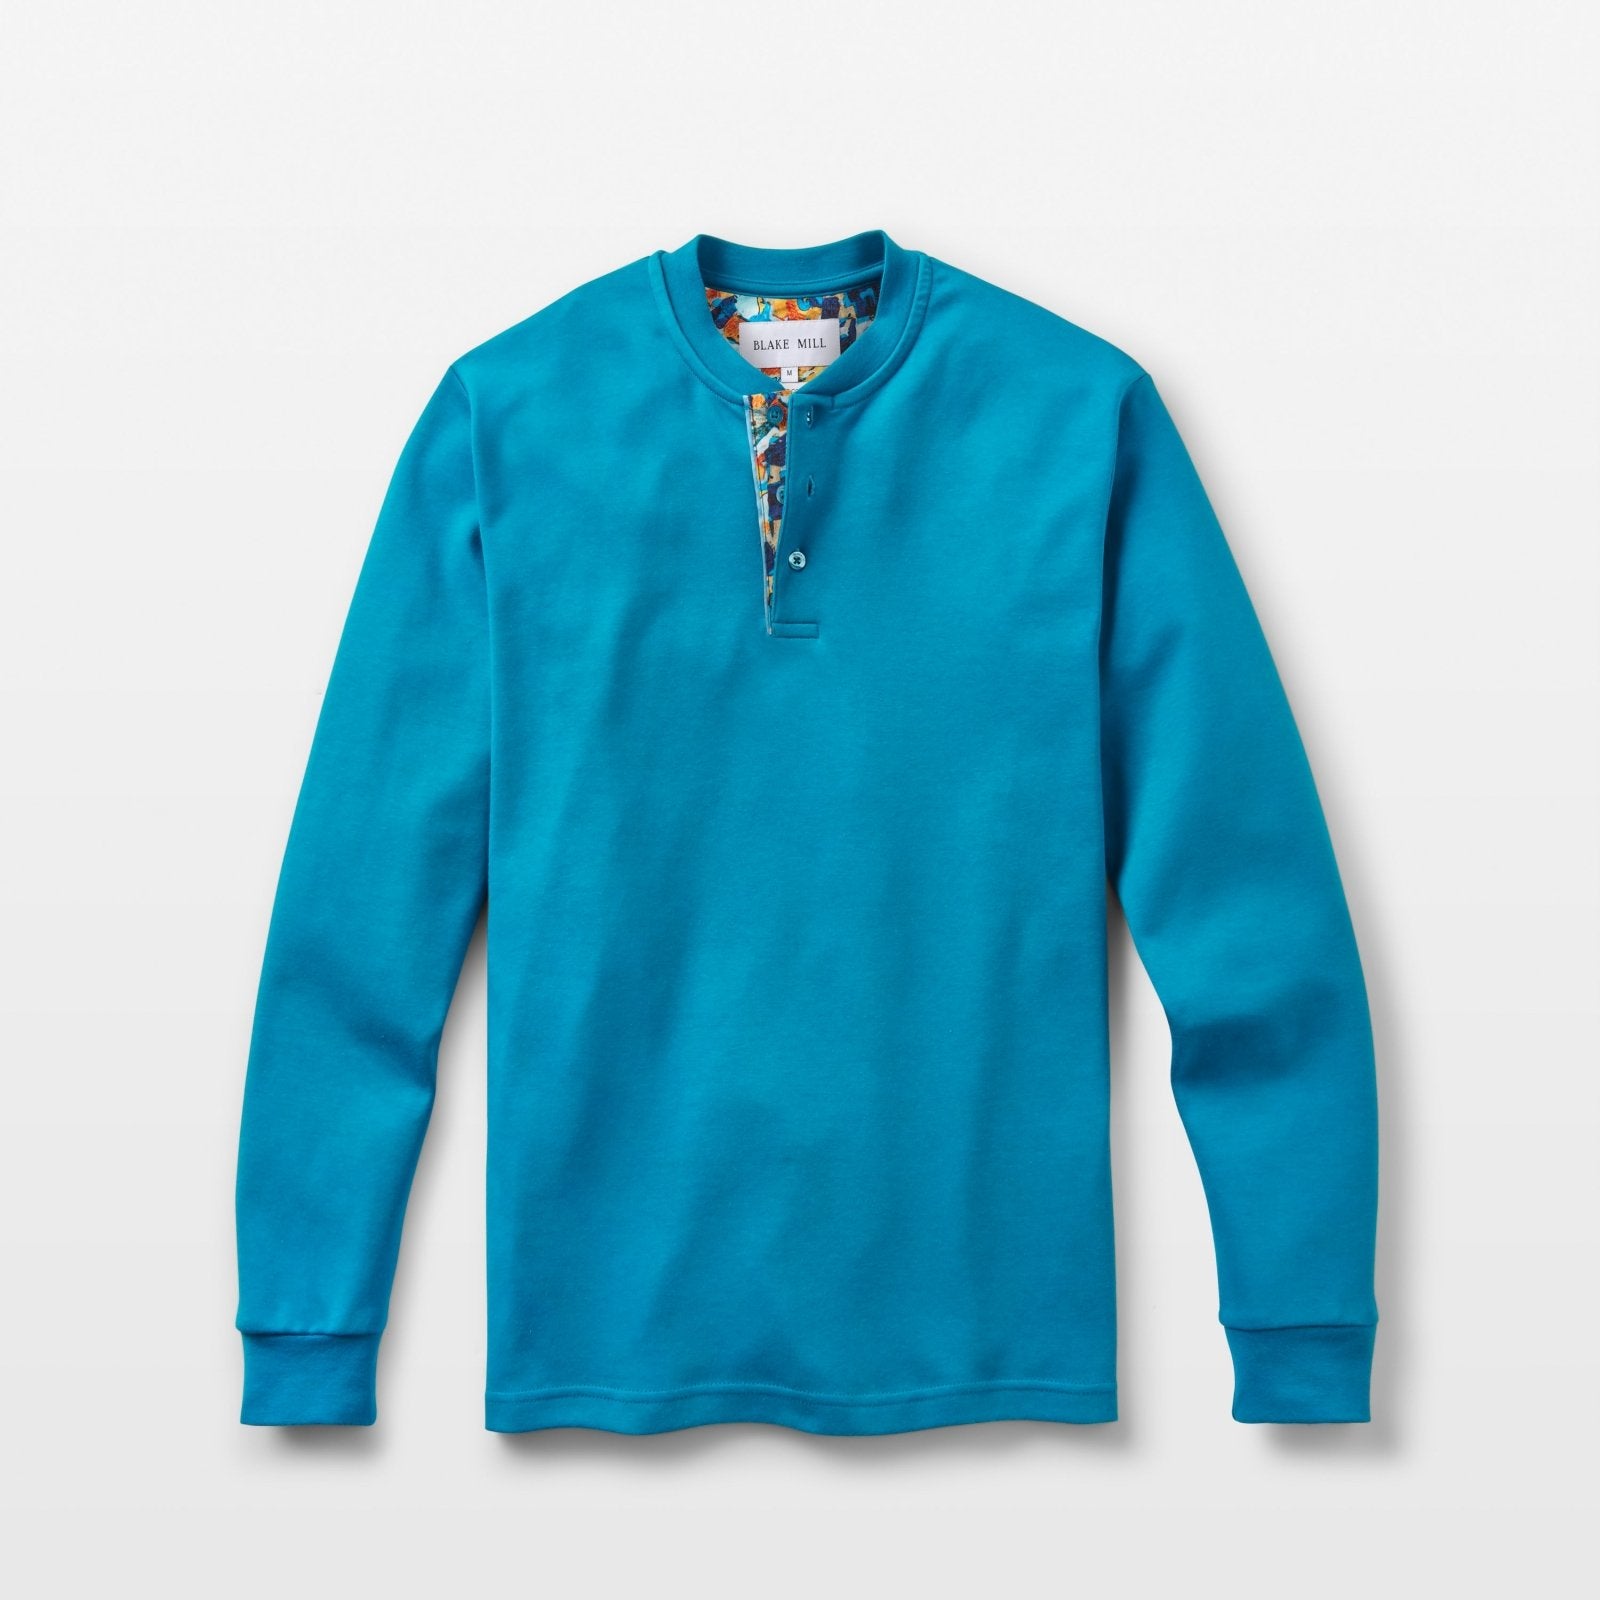 Teal with Vincent Light Lux Jersey - Blake Mill